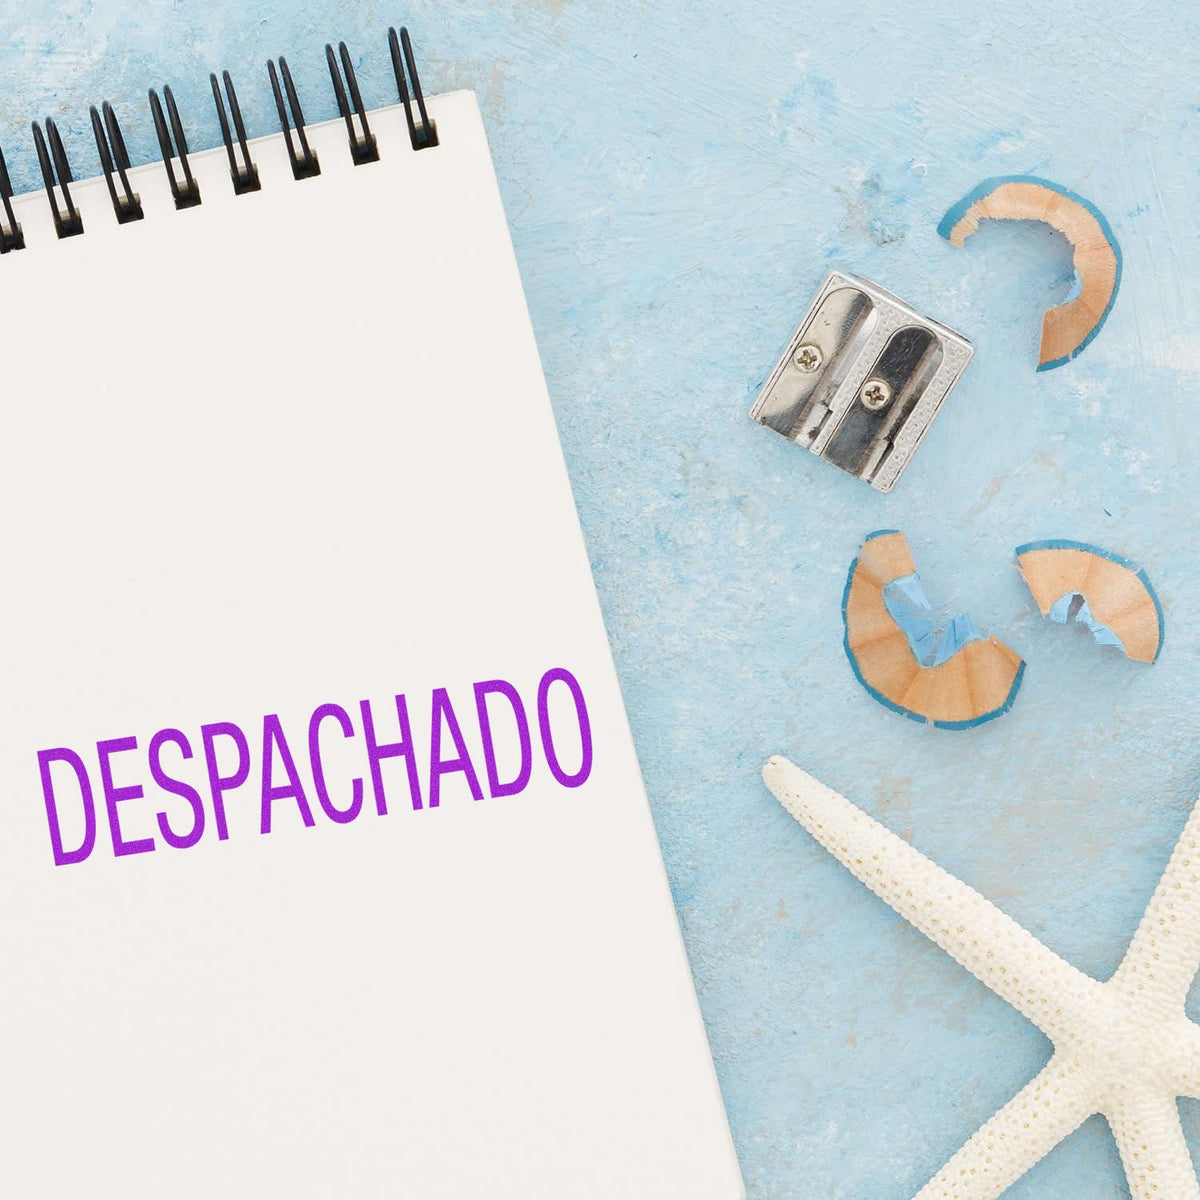 Self-Inking Despachado Stamp In Use